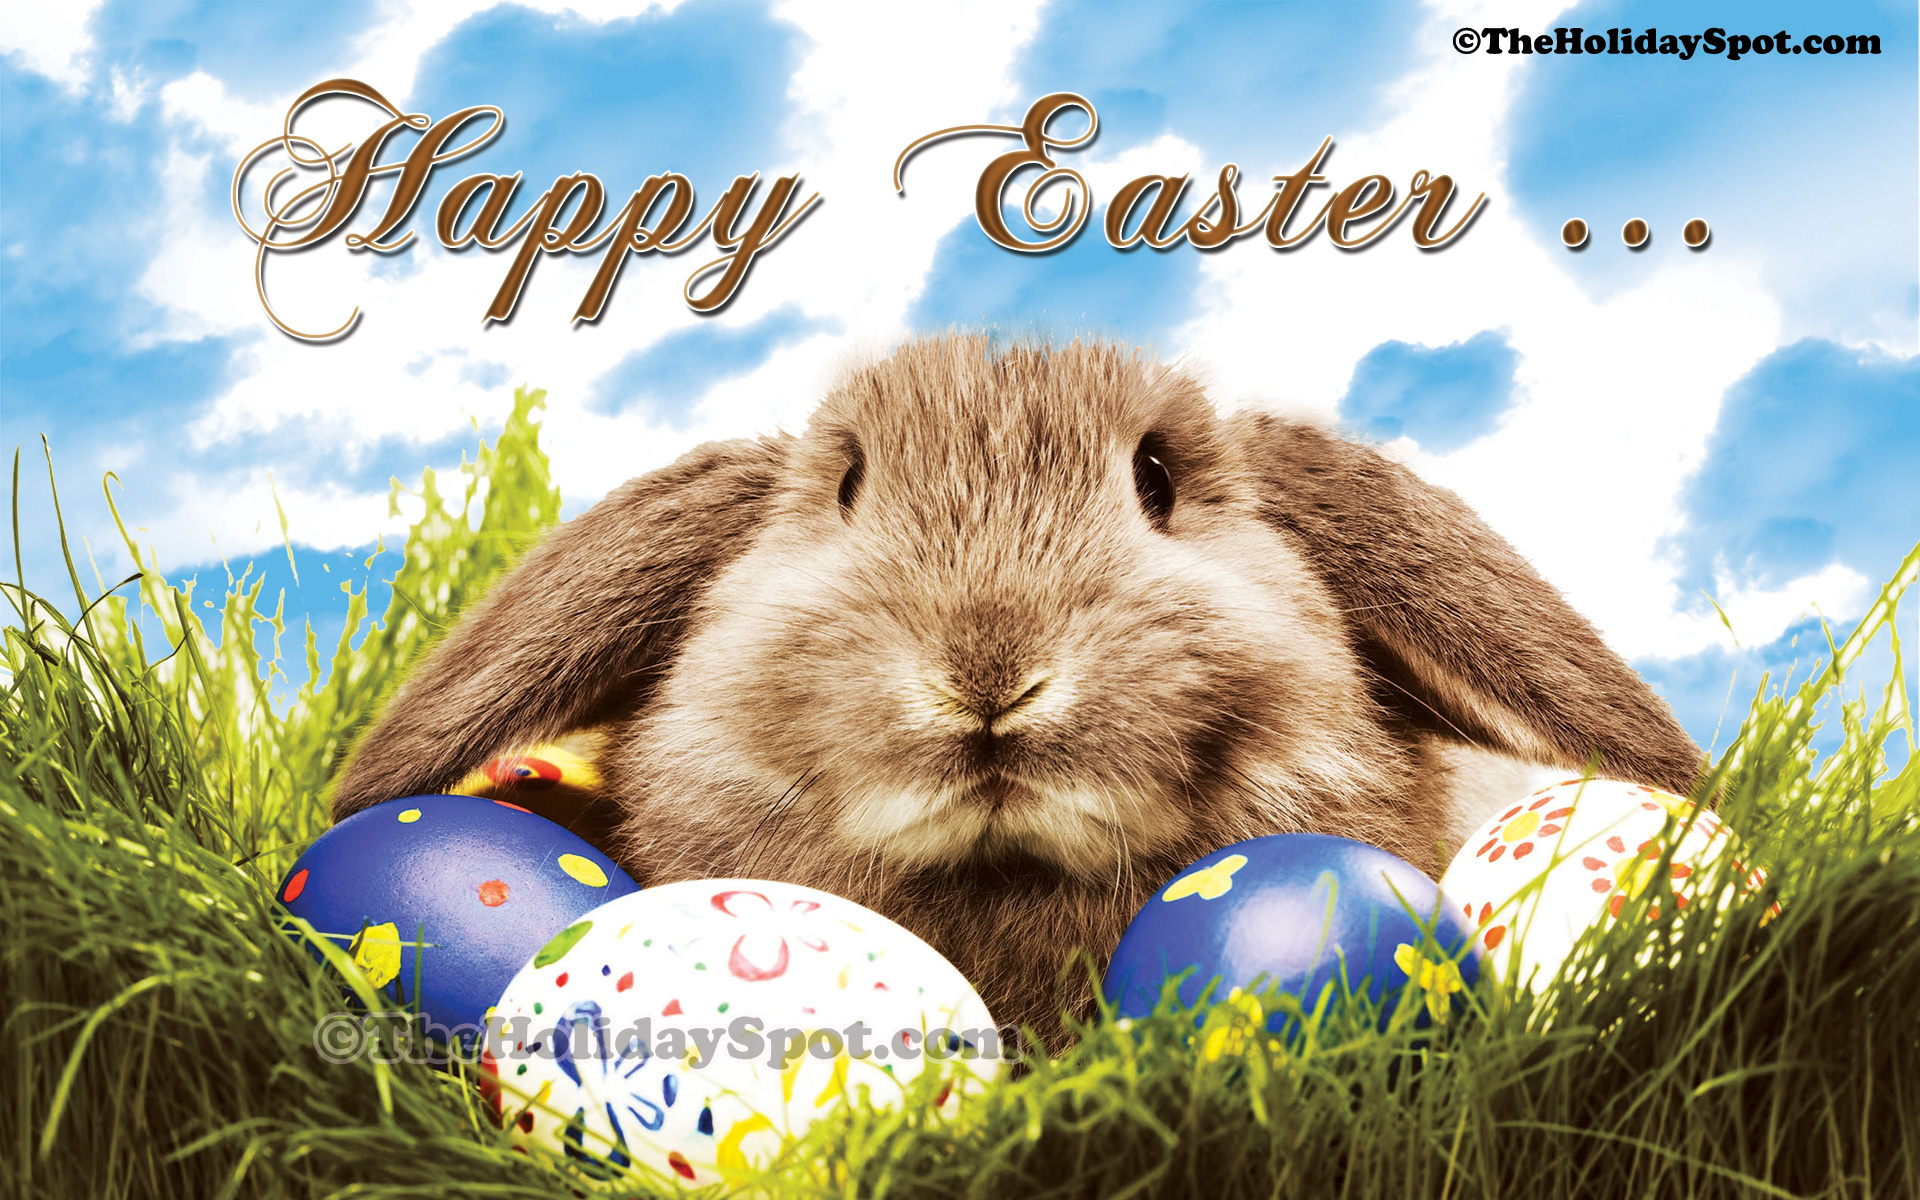 Happy Easter Wallpaper Cute Pictures